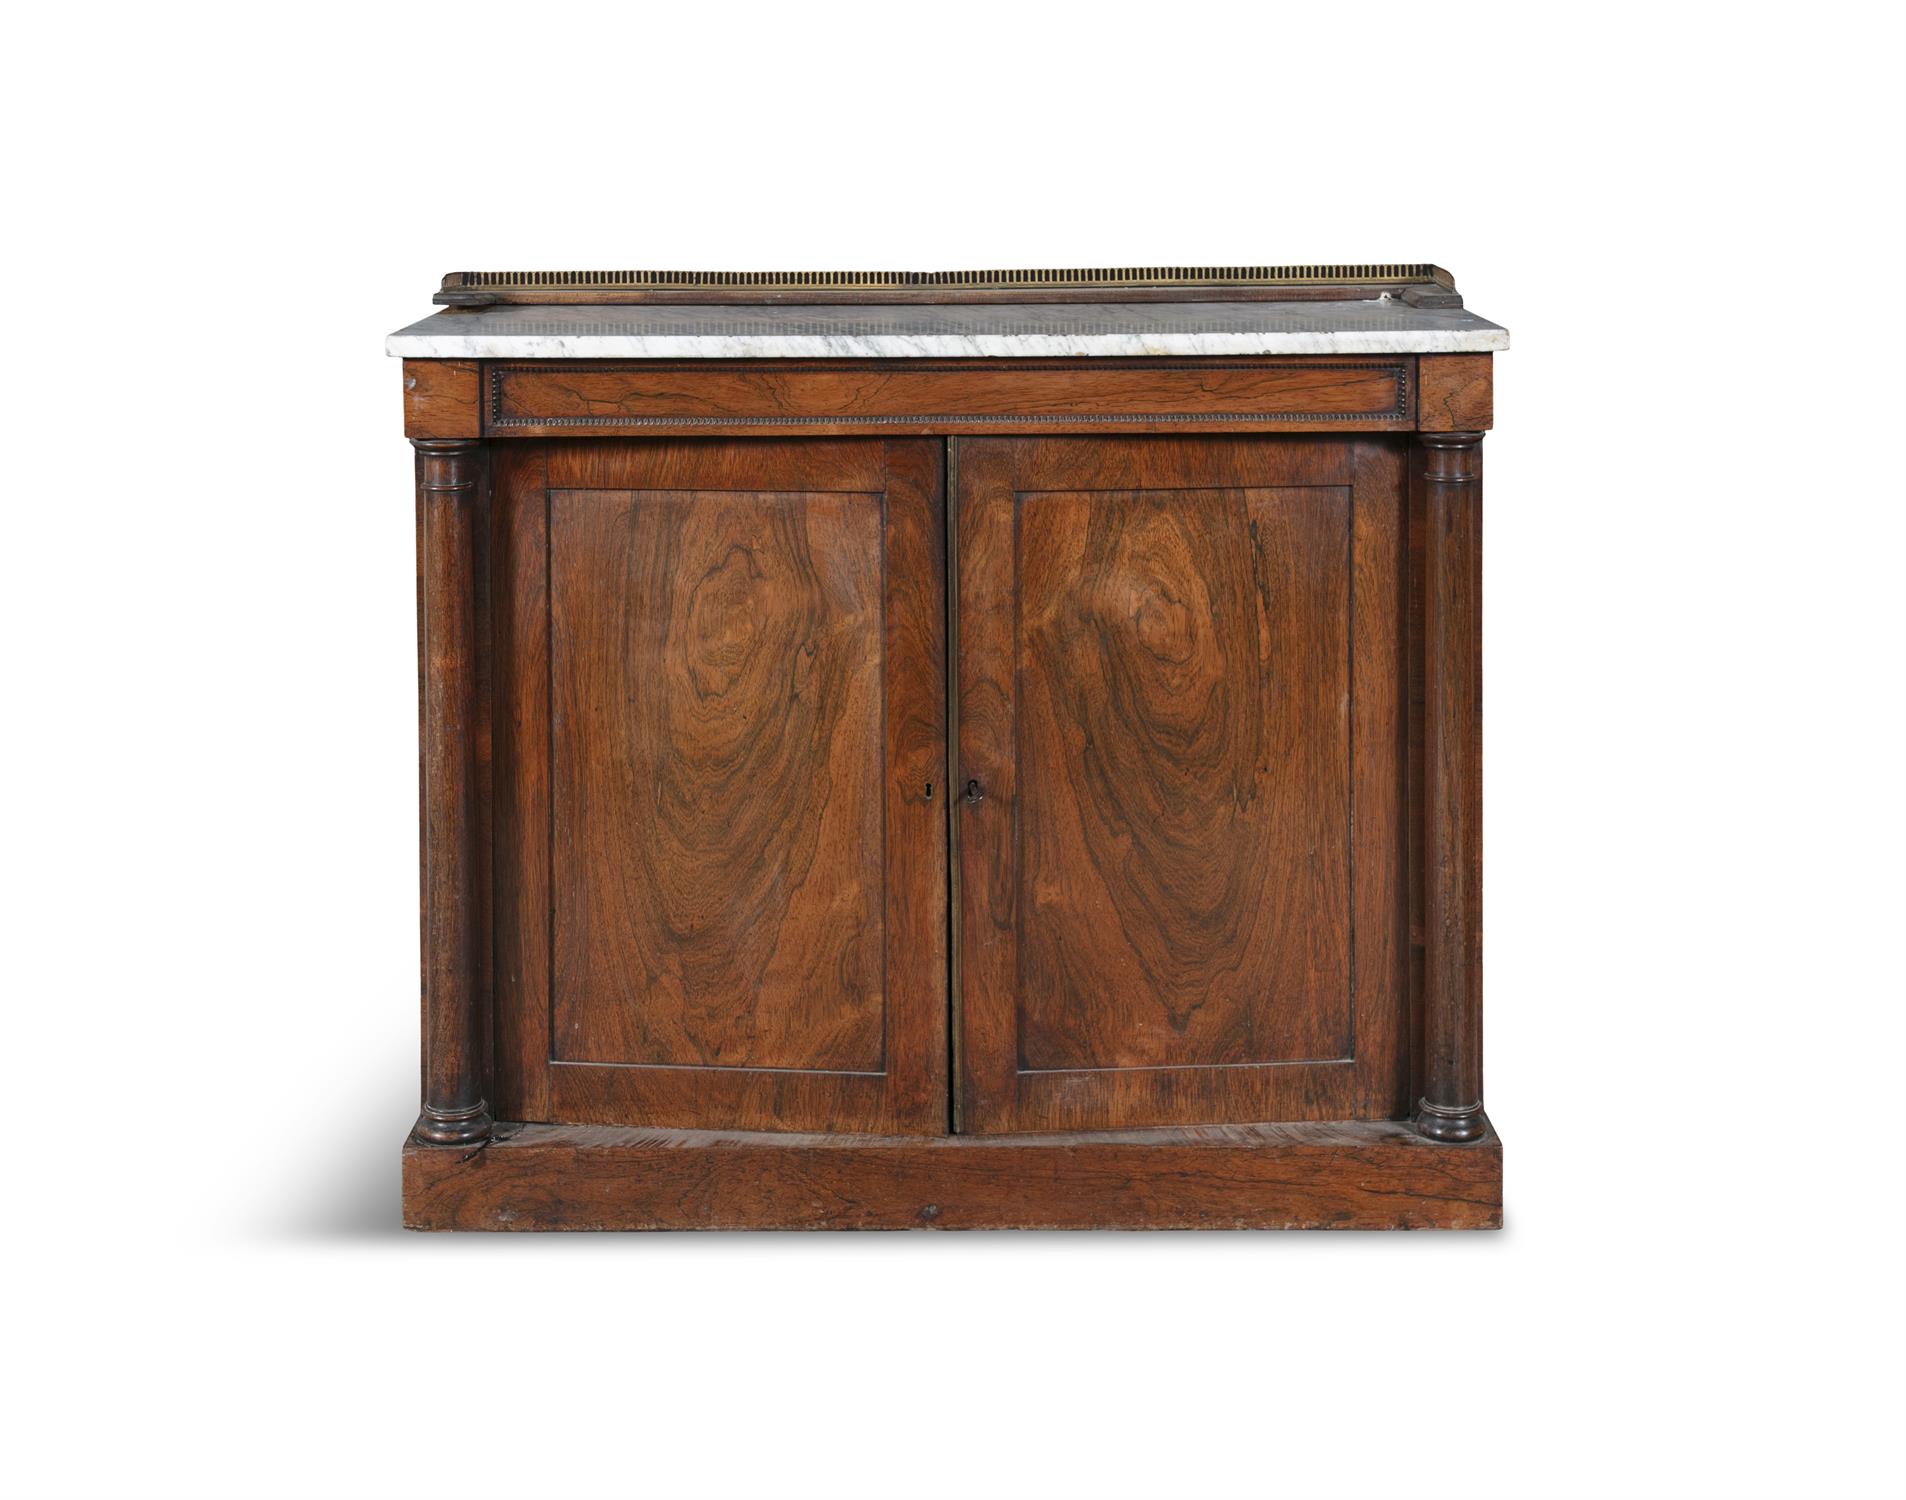 A WILLIAM IV FIGURED ROSEWOOD SIDE CABINET, C.1830, the white marble top with three quarter